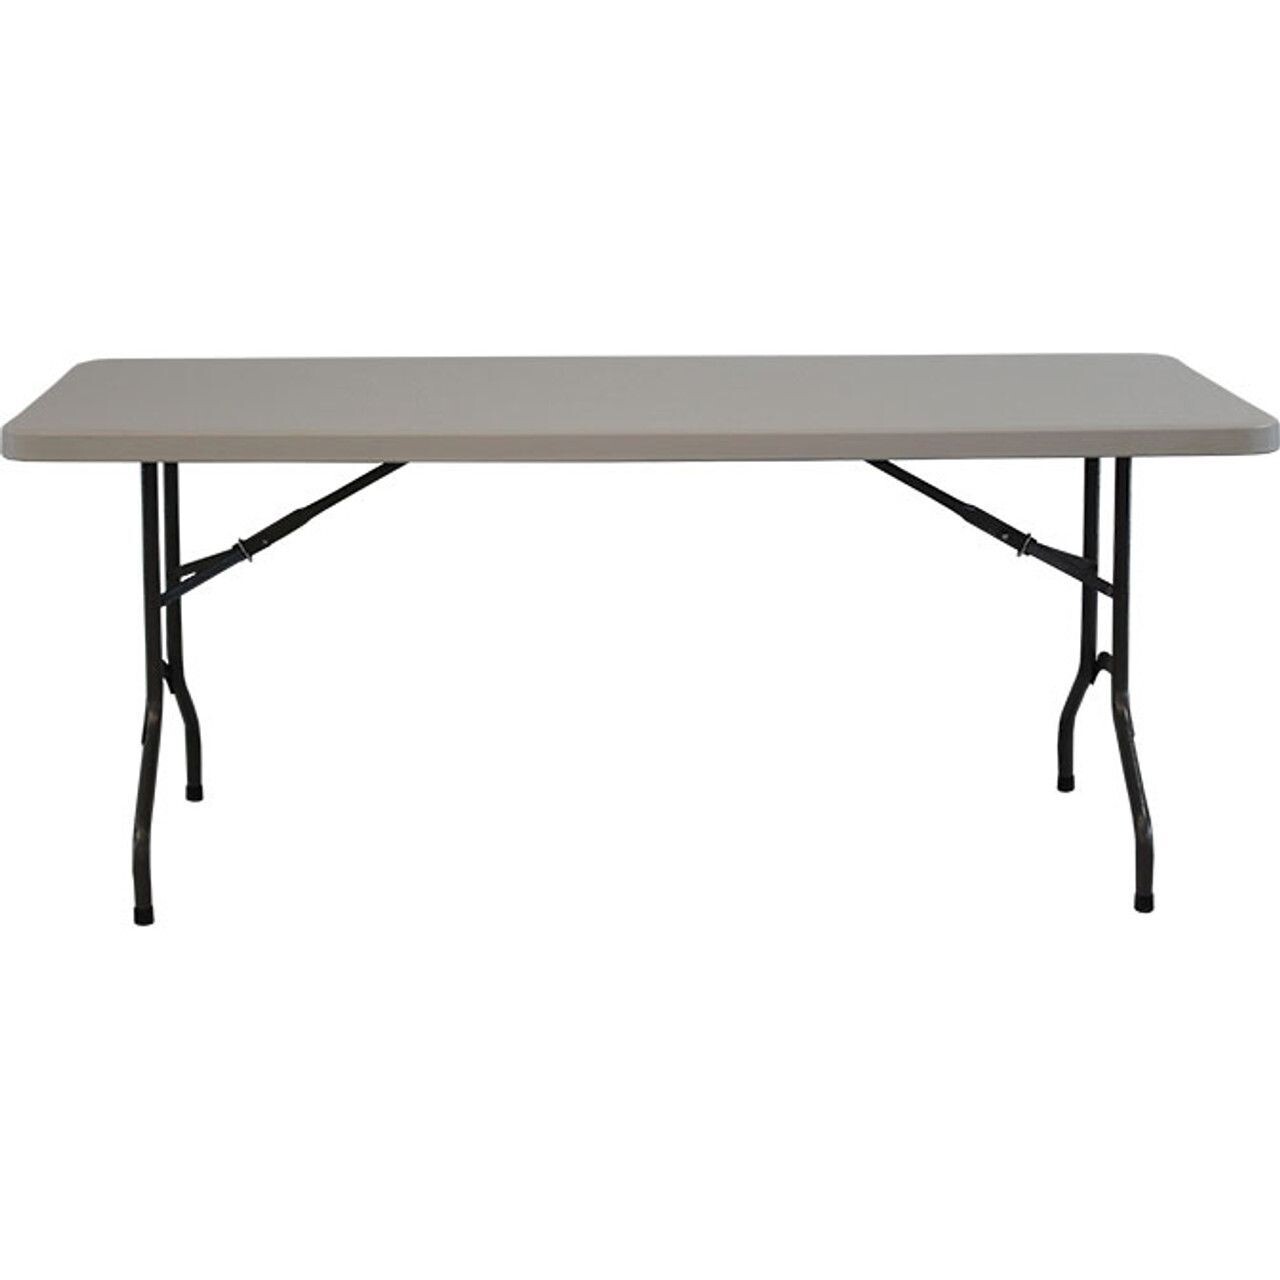 6-Foot Banquet Table